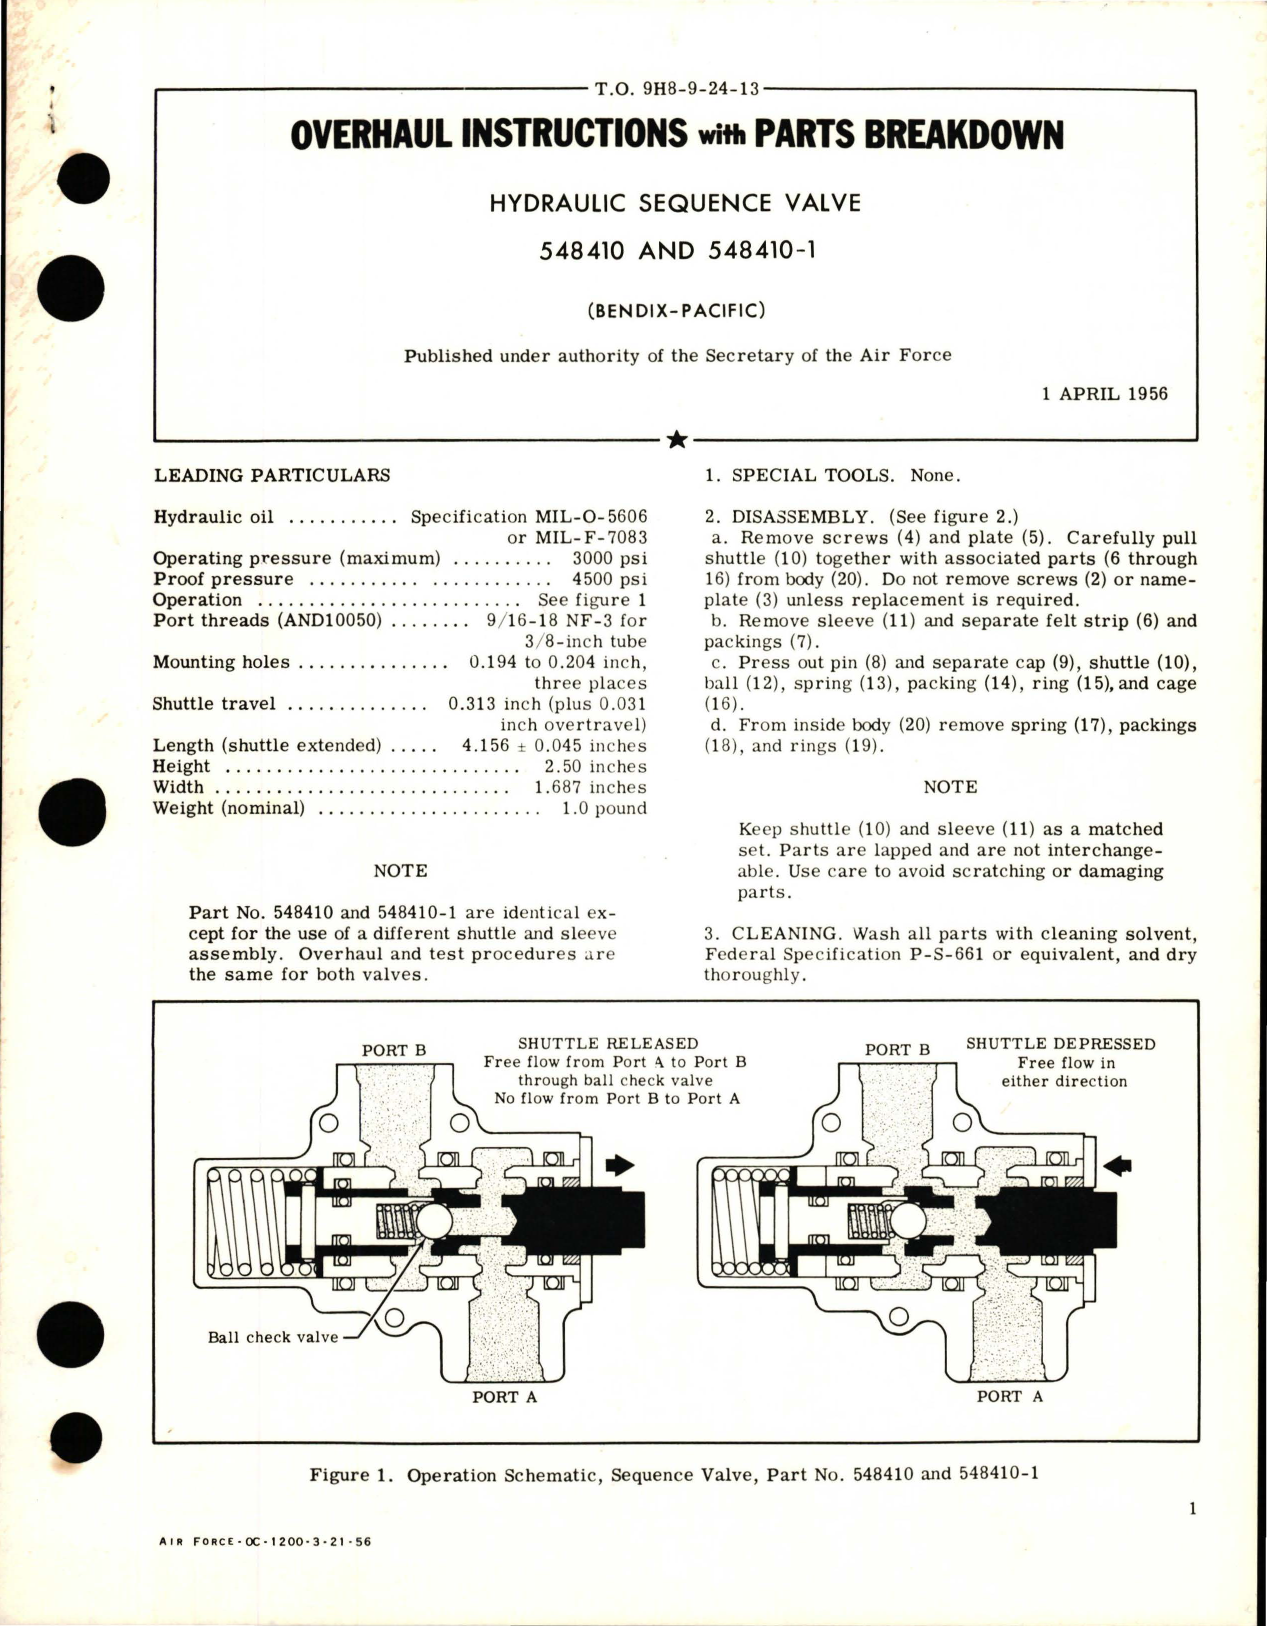 Sample page 1 from AirCorps Library document: Overhaul Instructions with Parts Breakdown for Hydraulic Sequence Valve - 548410 and 548410-1